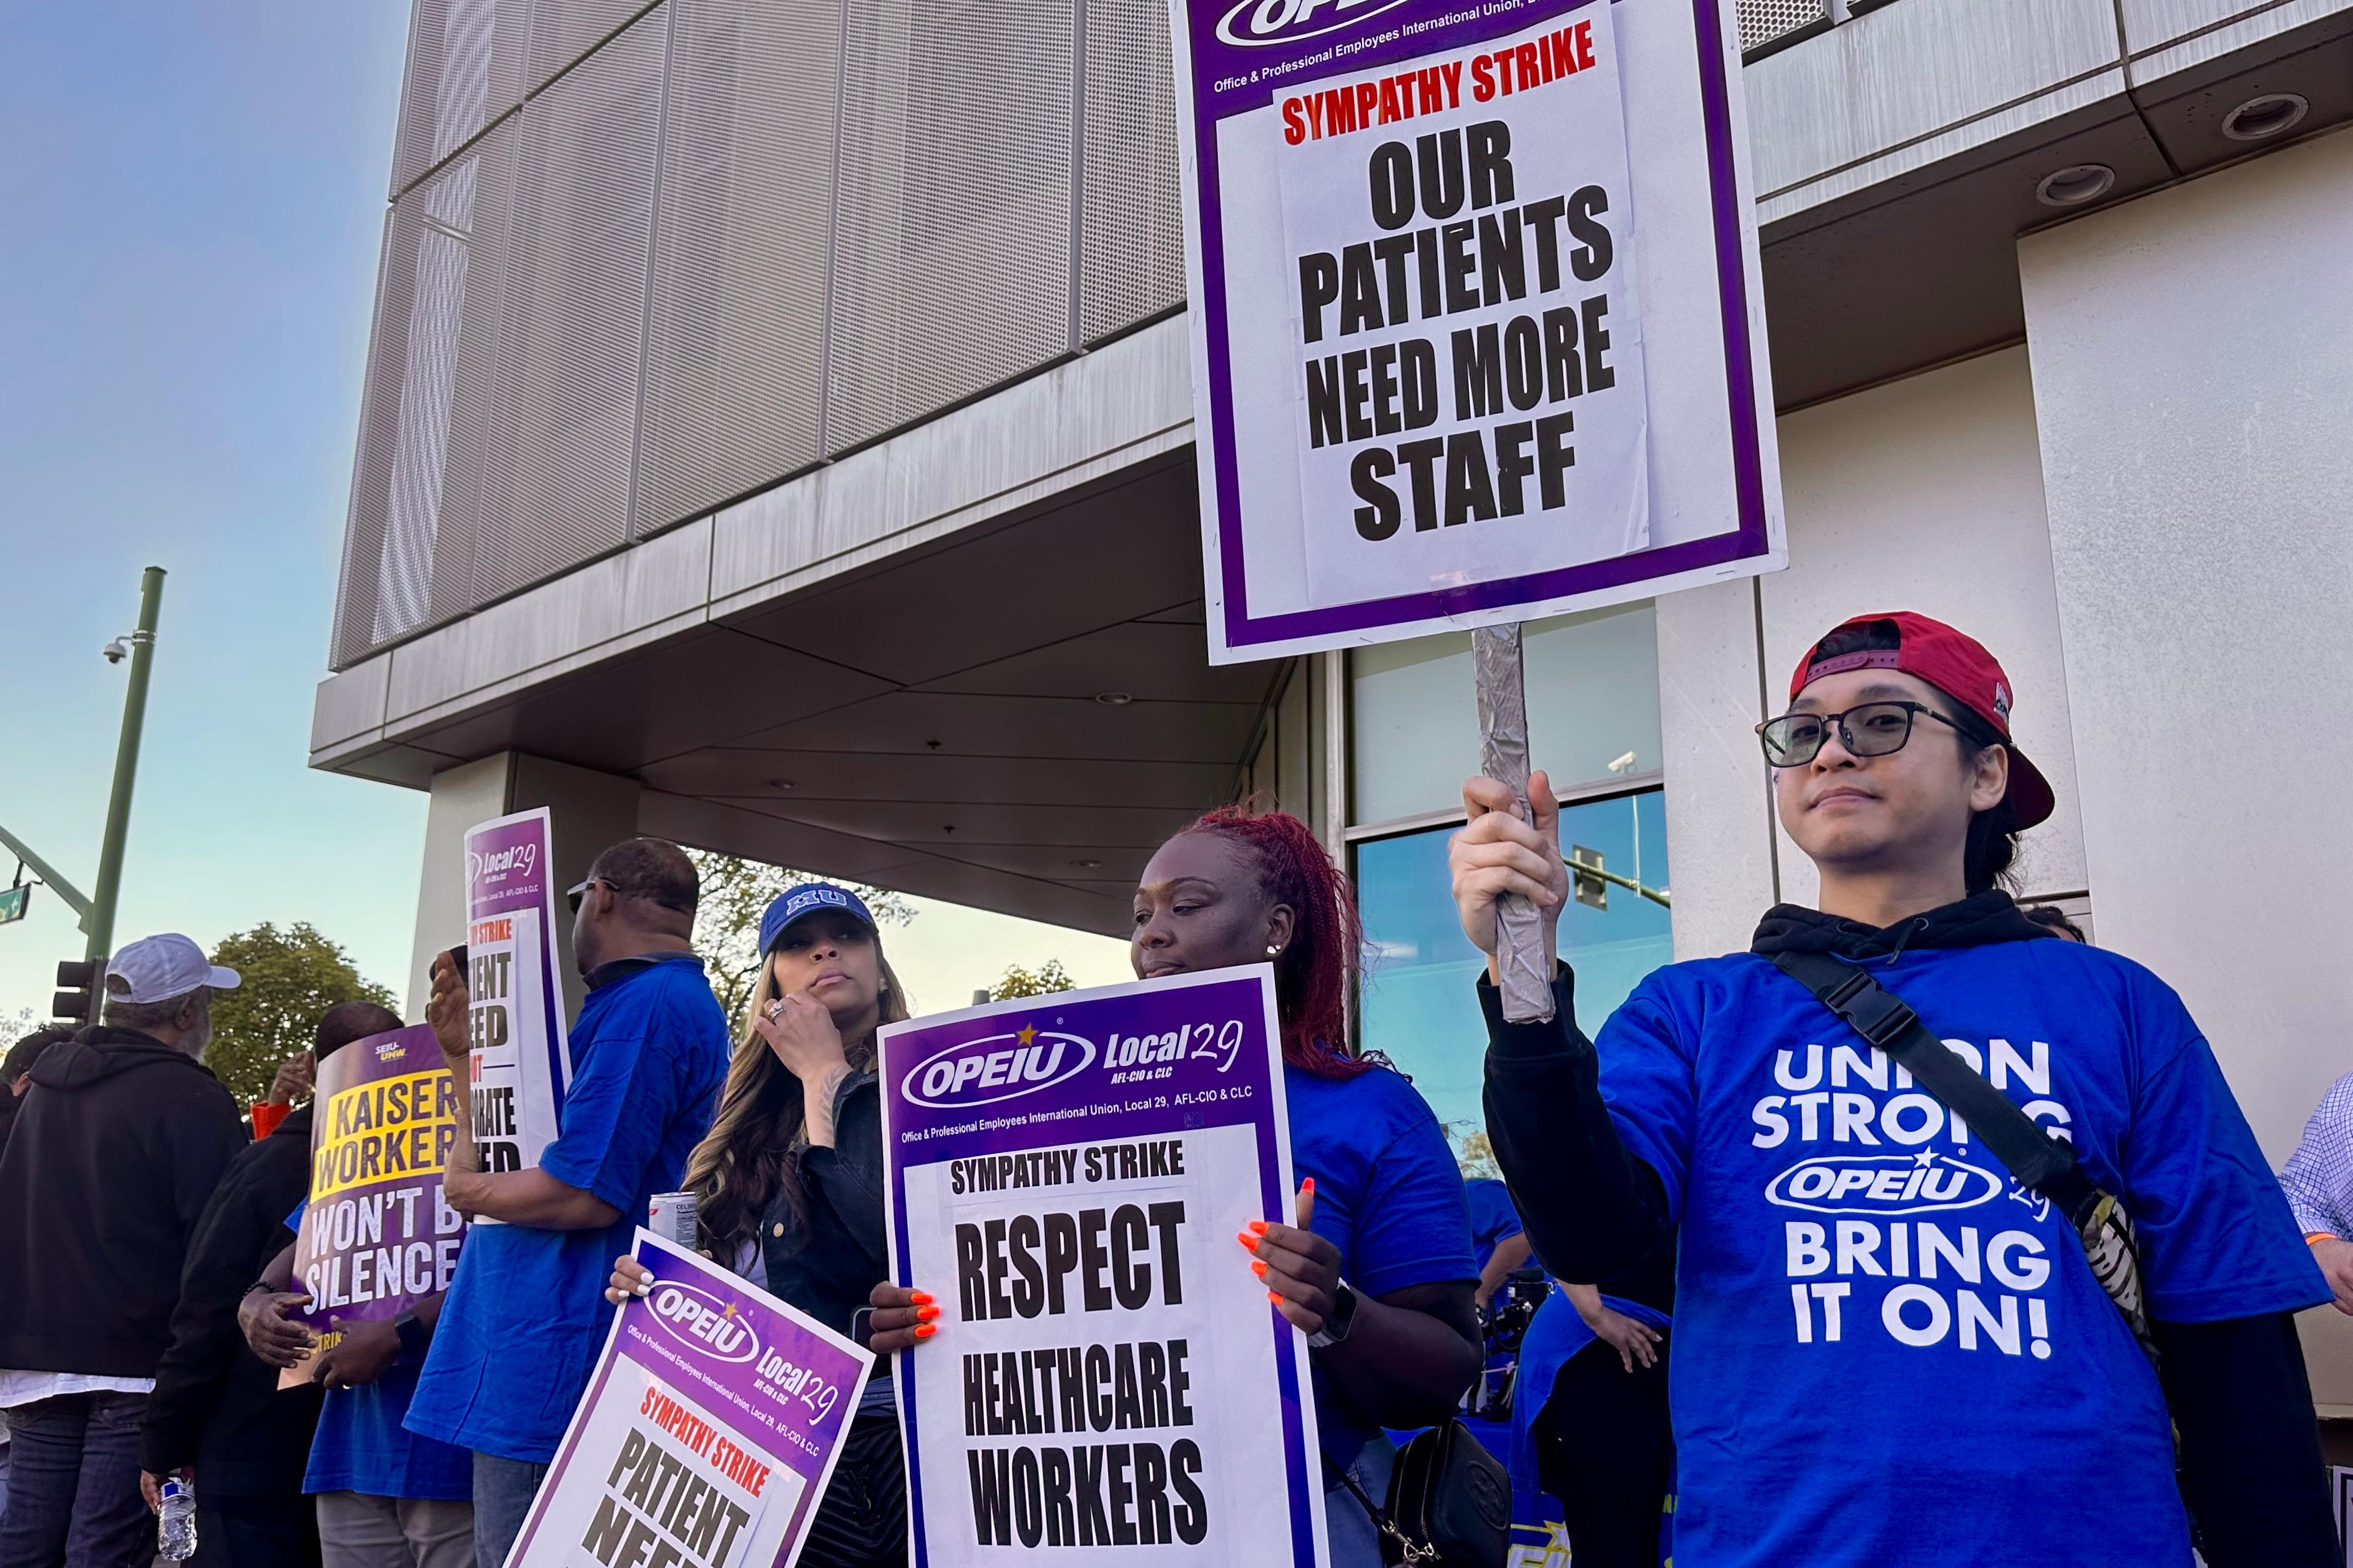 Unions, Kaiser Permanente Reach Tentative Deal After Largest-Ever US Health Care Strike